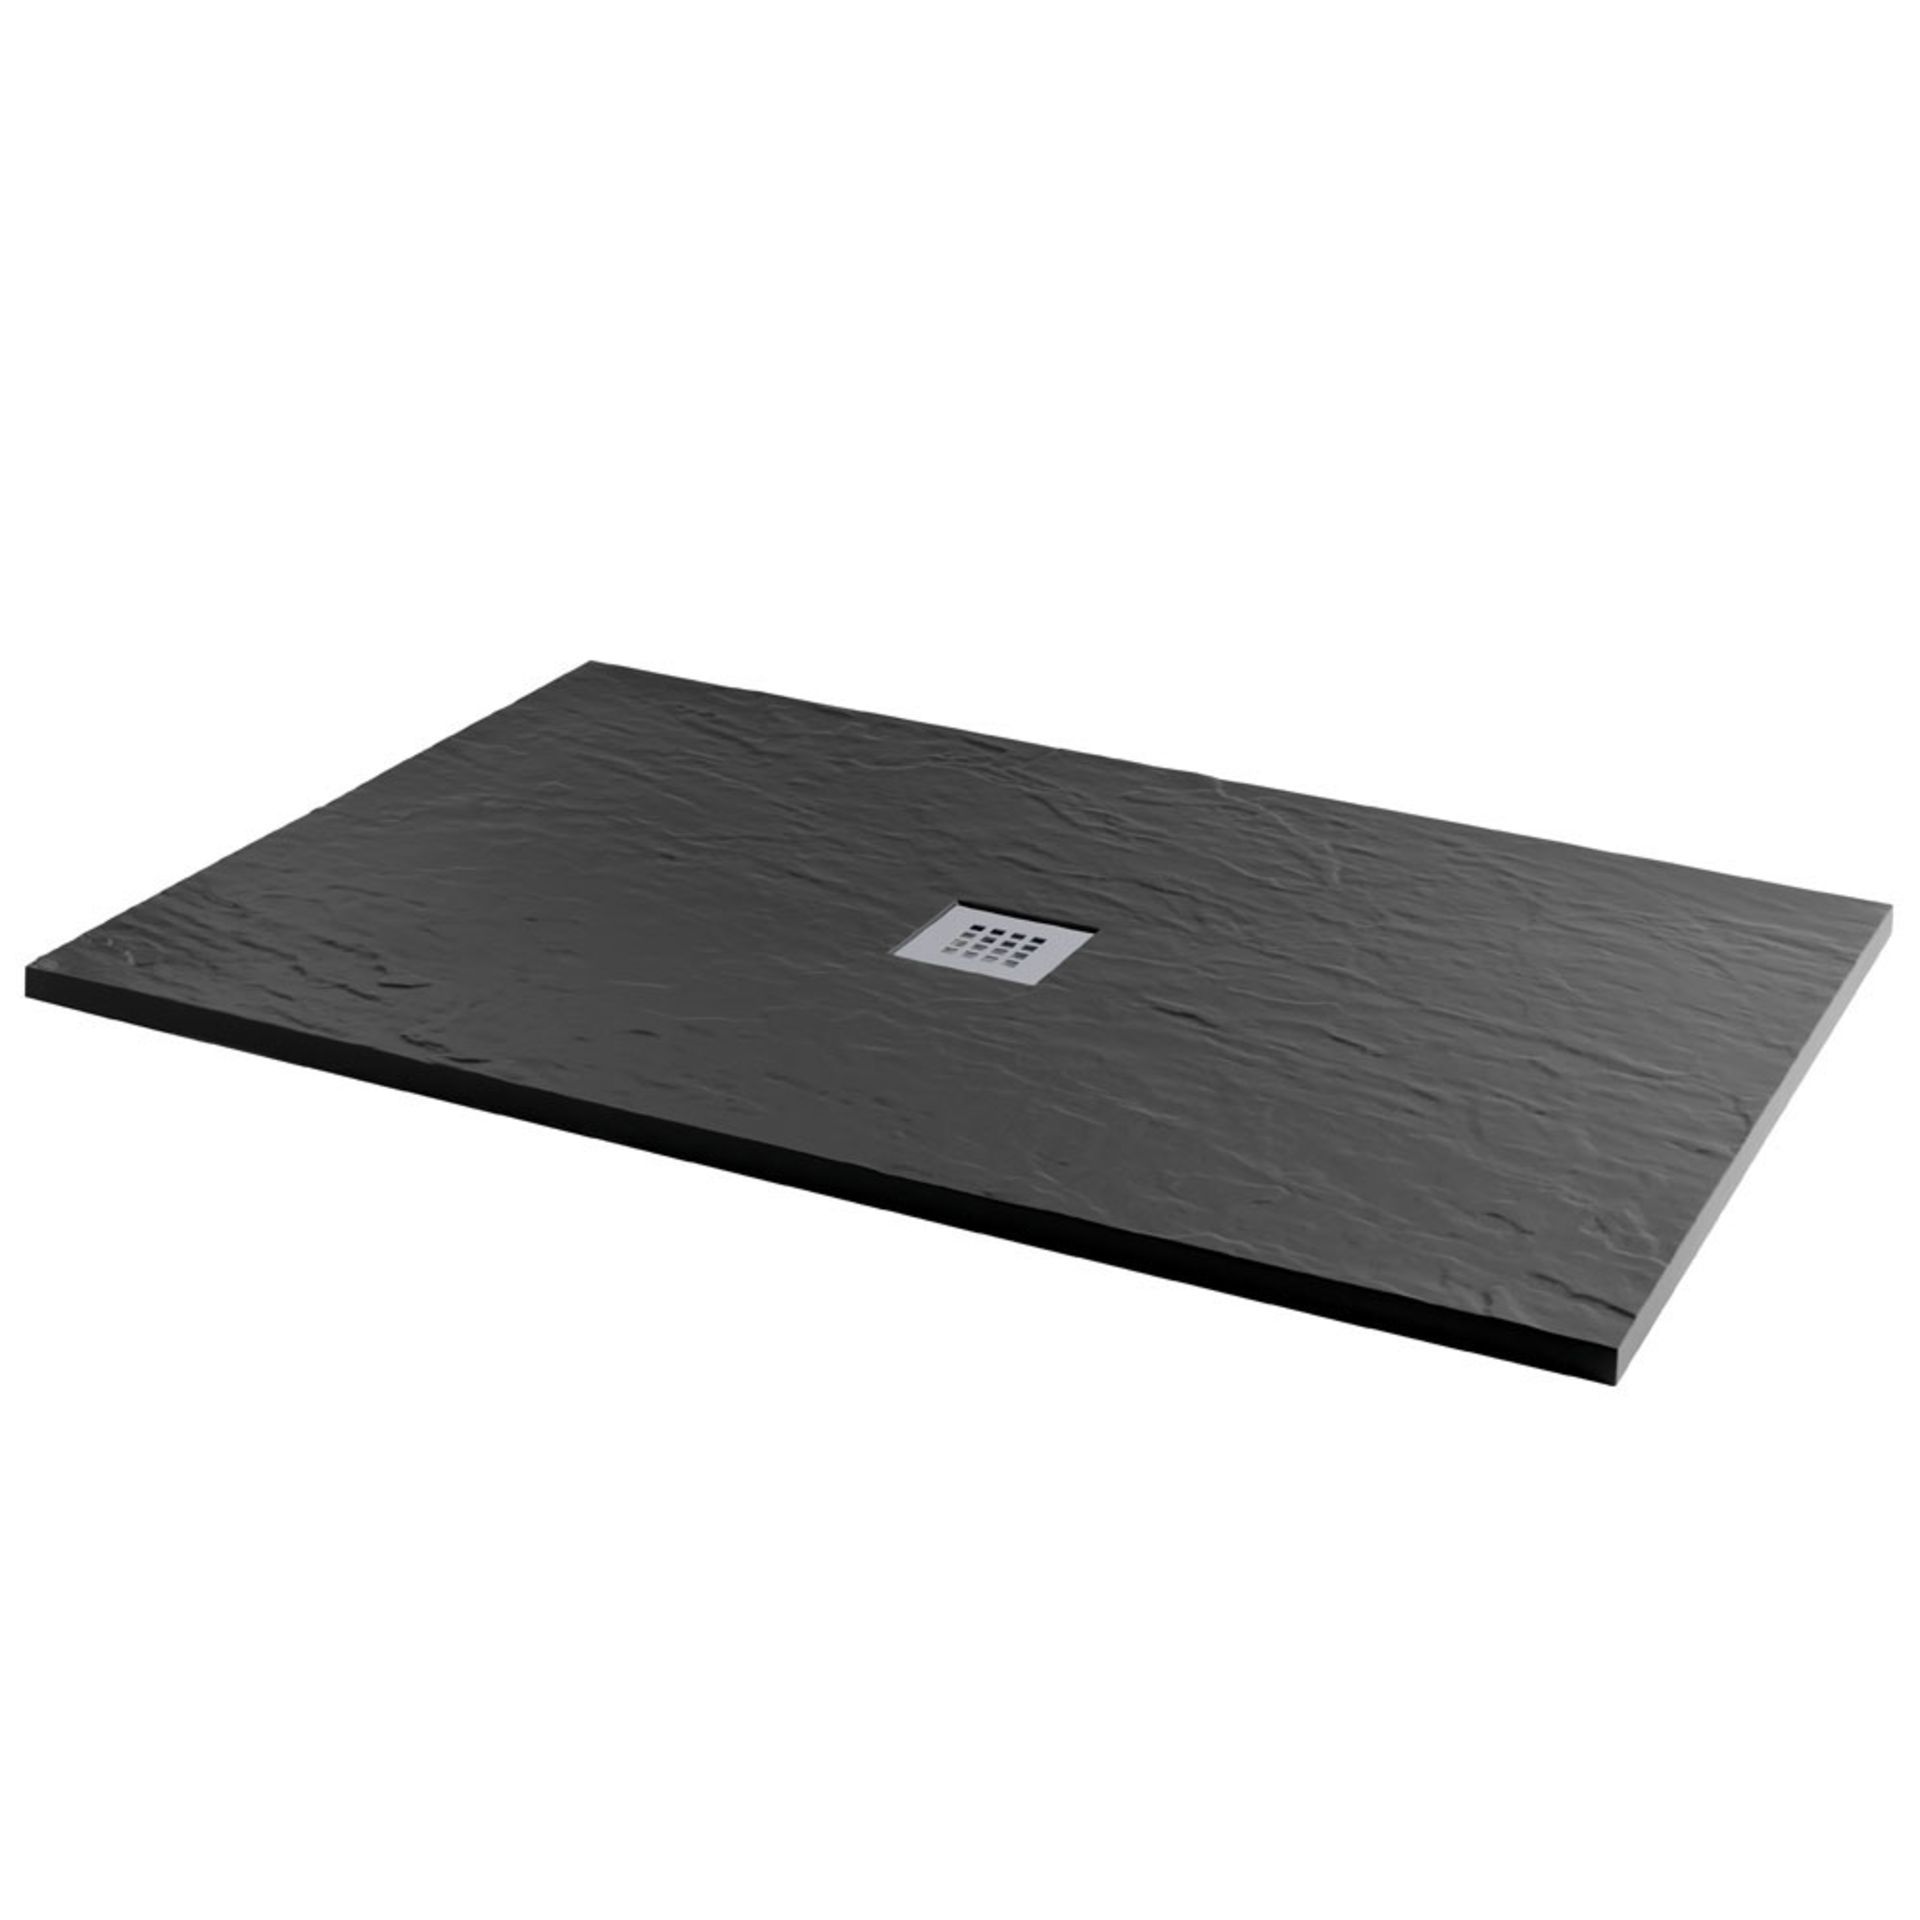 BRAND NEW 1000X800MM Rectangle Black Slate Effect Shower Tray. RRP £359.99.A textured black slate